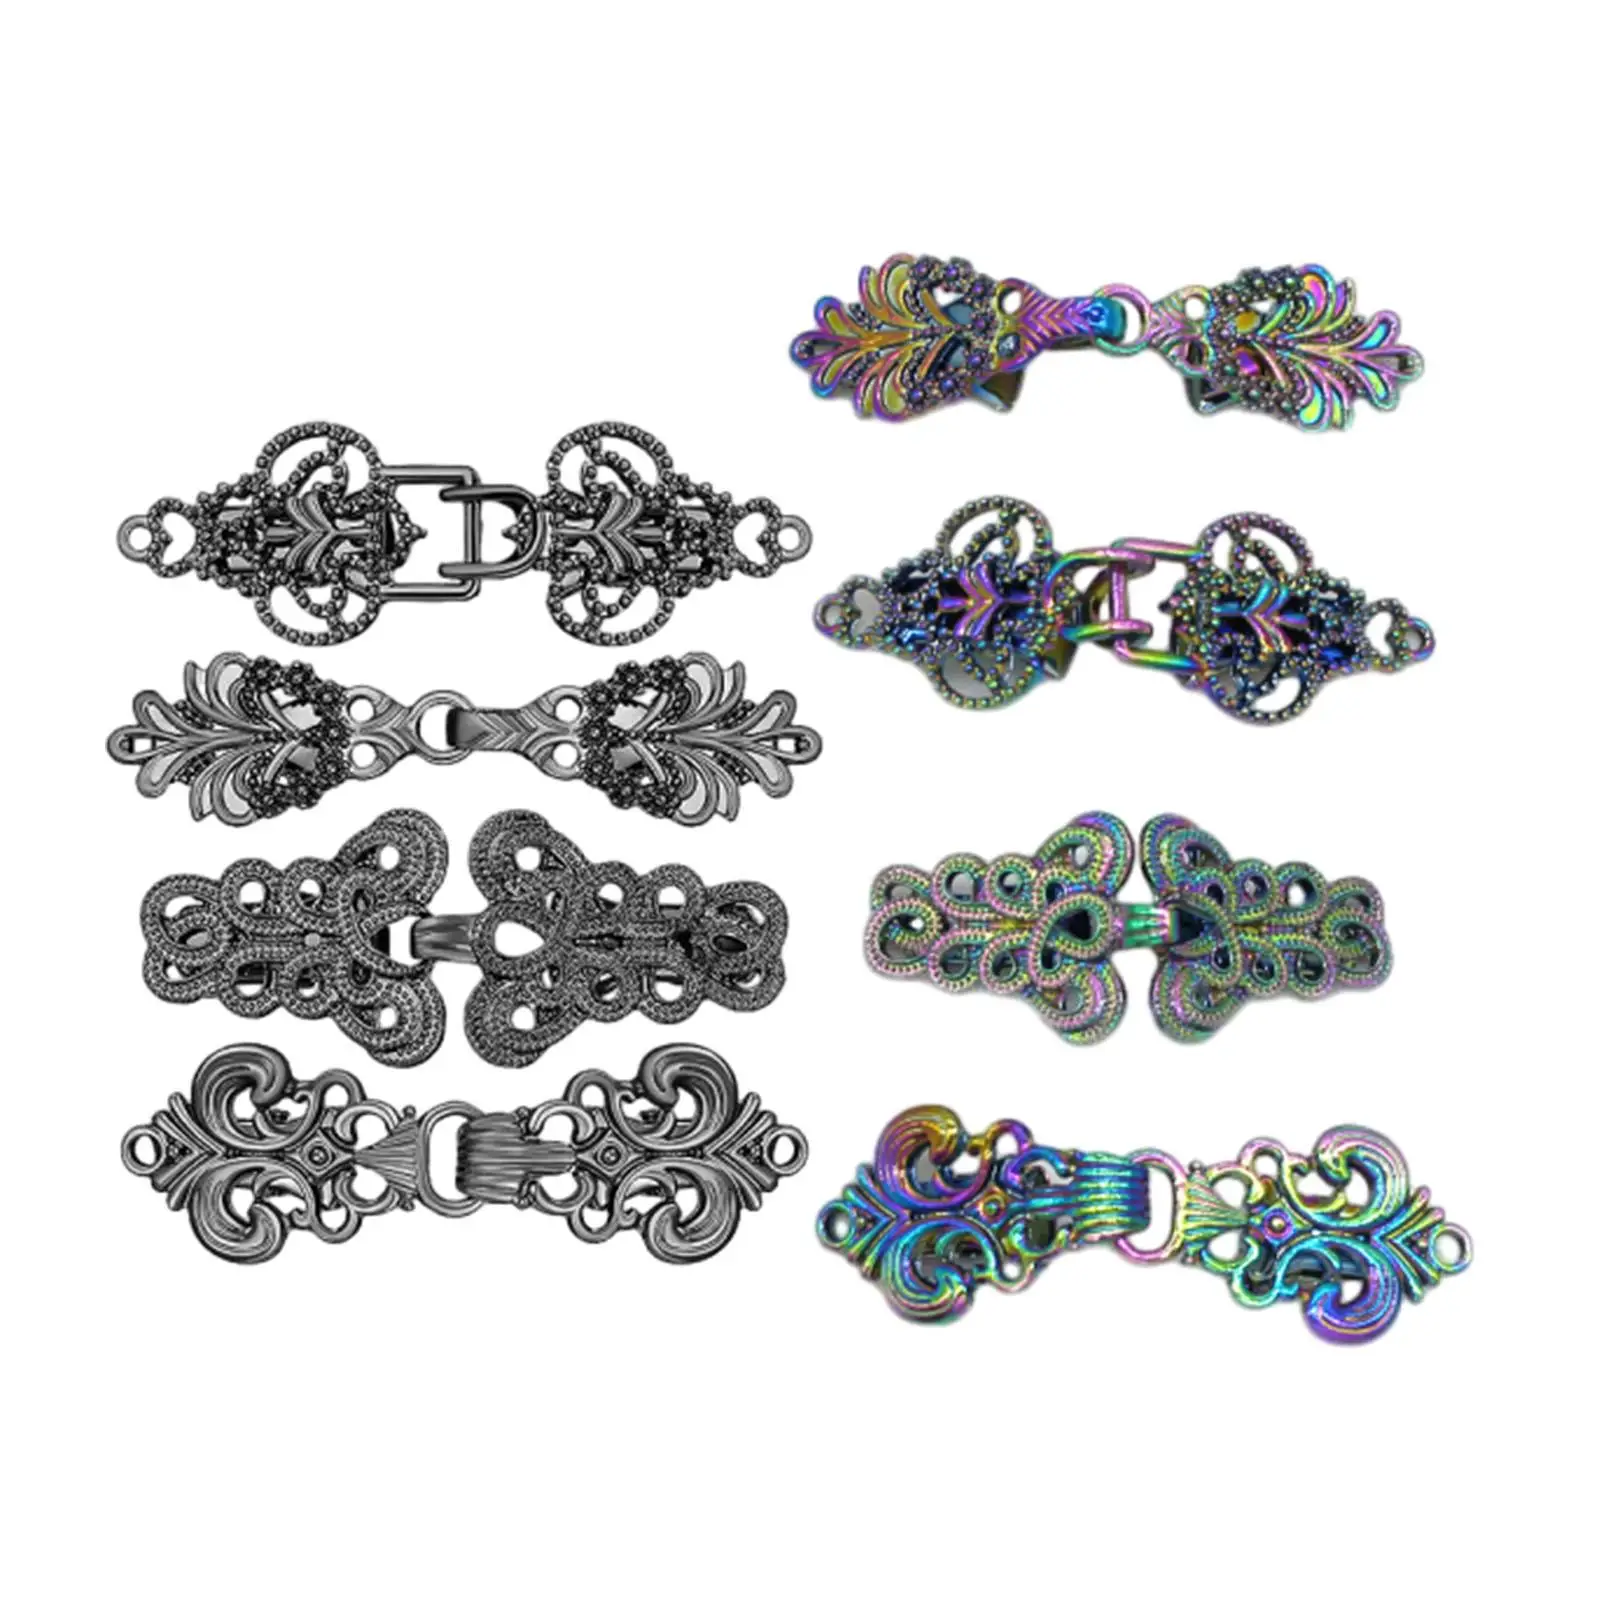 4x Sweater Shawl Clips Decorative Alloy Easy to Use Portable Medieval Clips Fasteners for Scarf Shirt Cardigan Shawl Costume